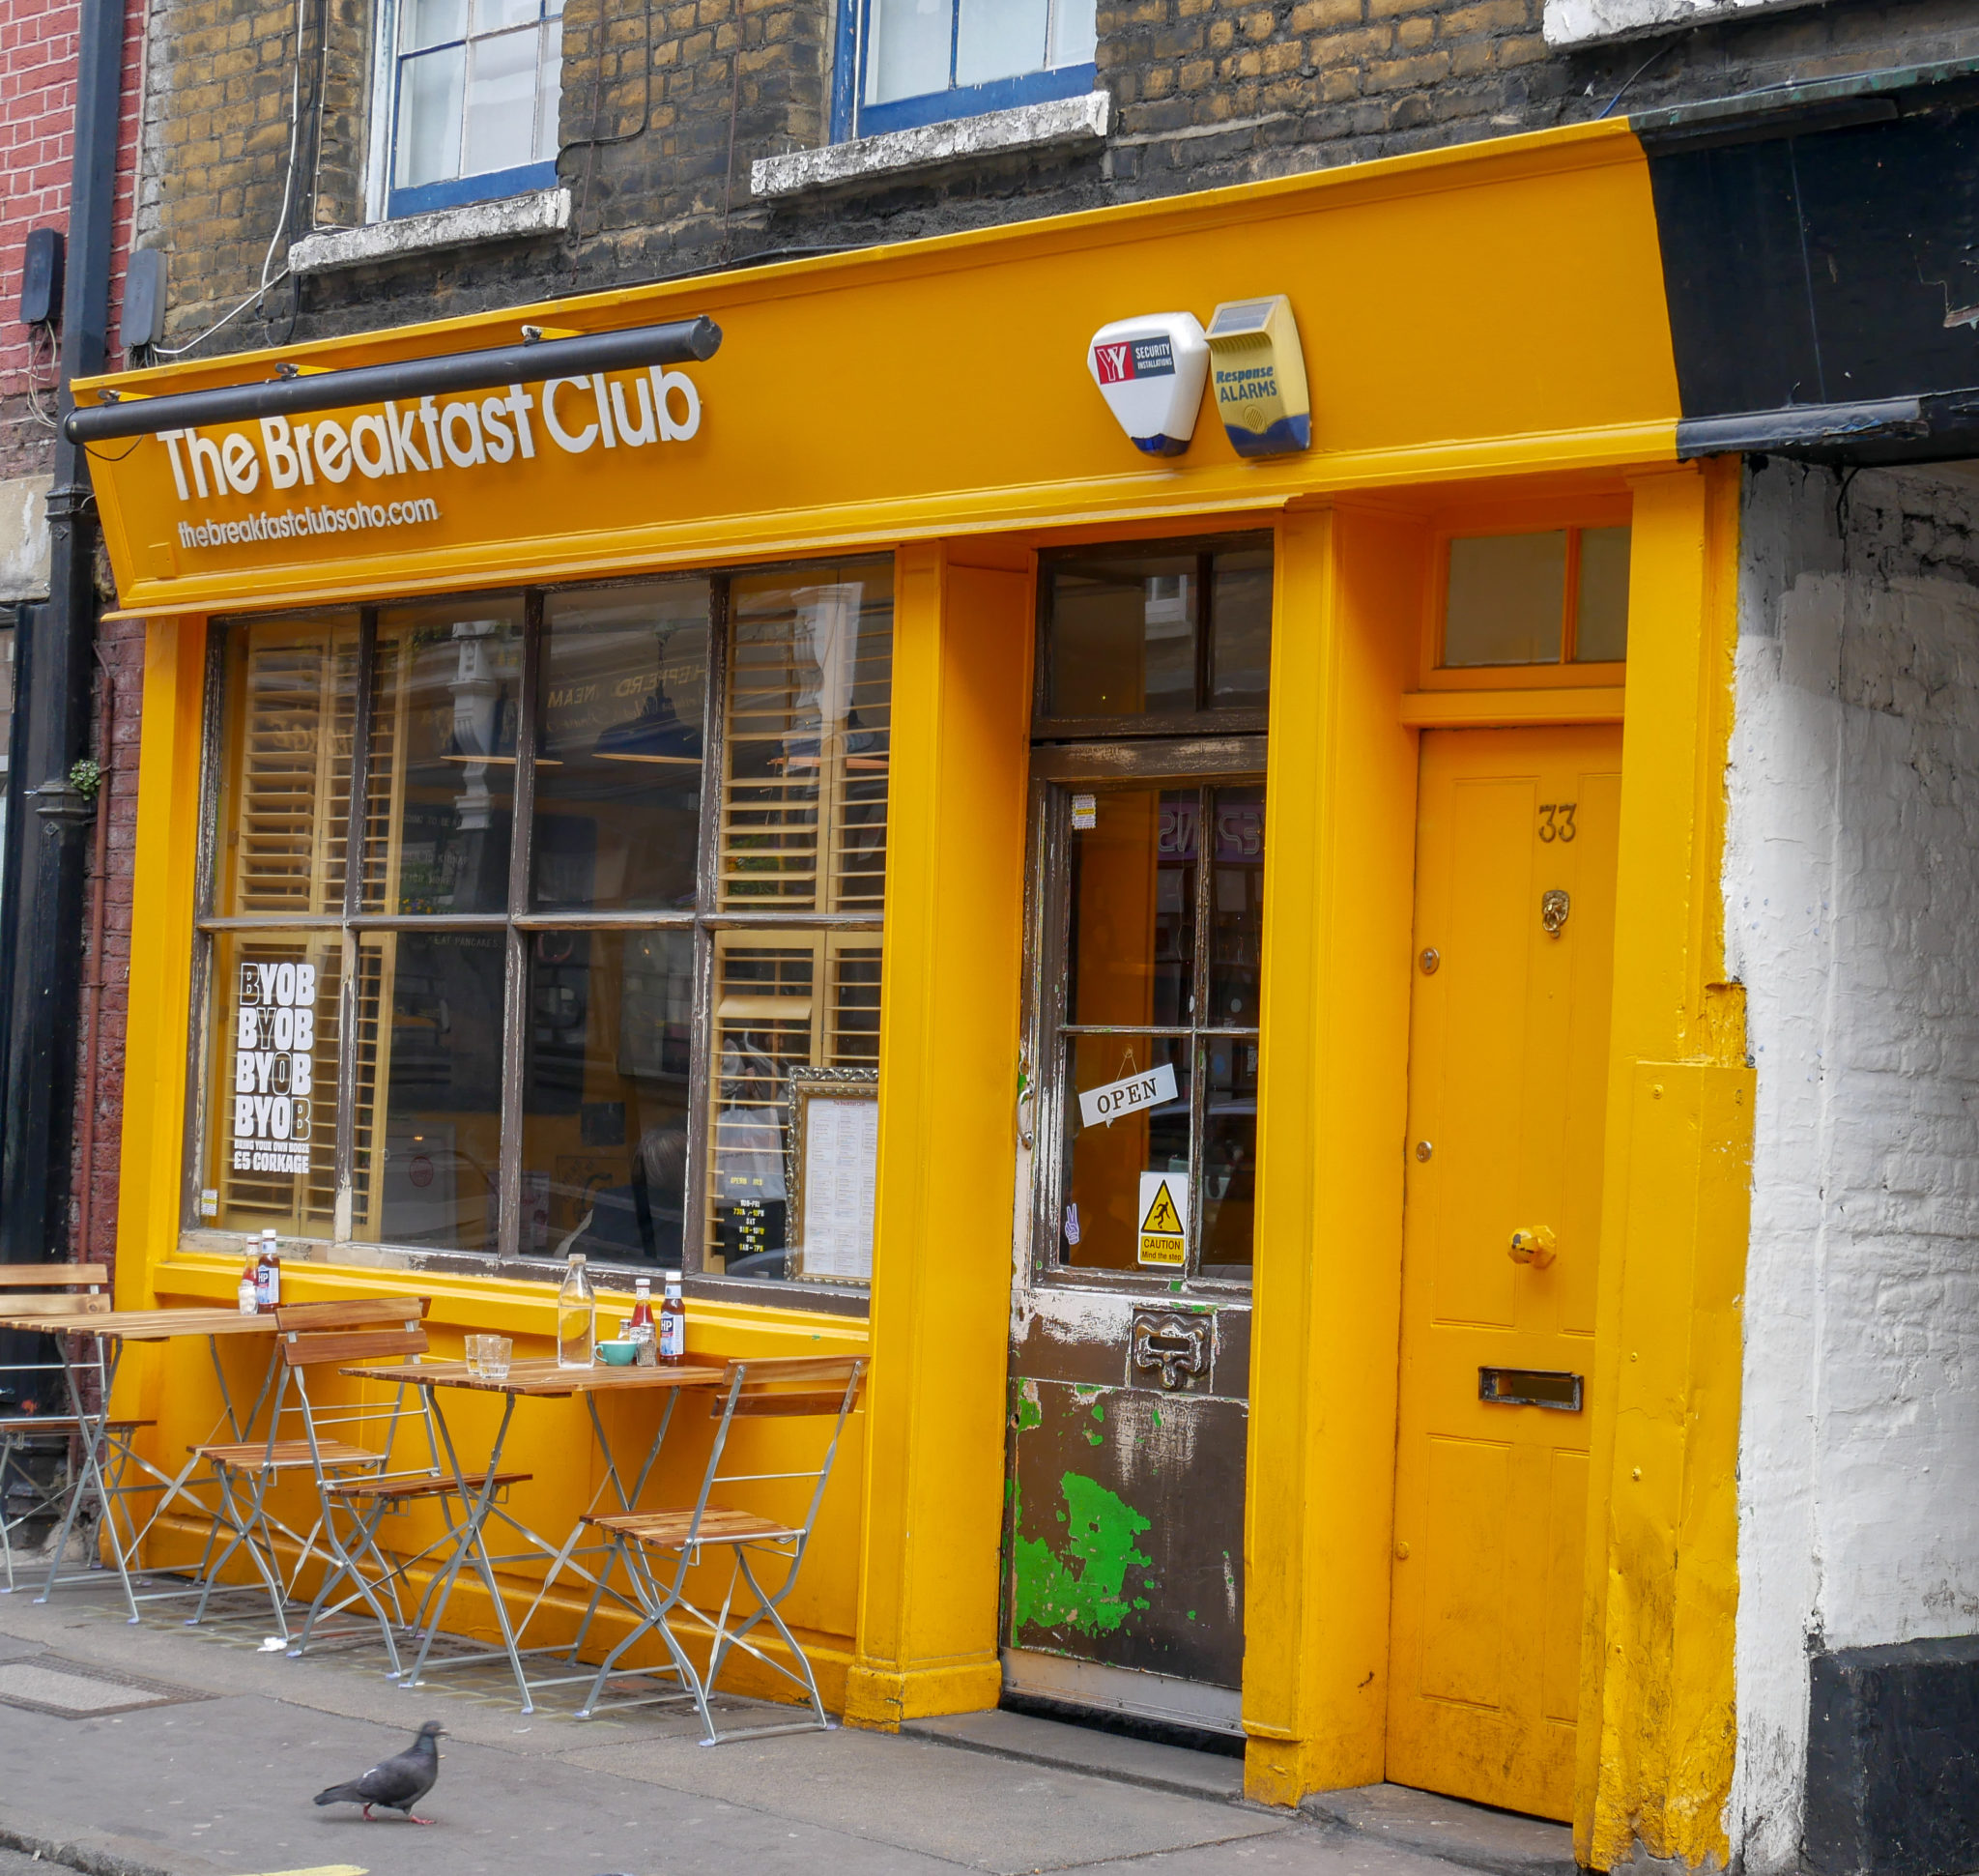 The yellow walls, door and sign of The Breakfast Club, Soho, London